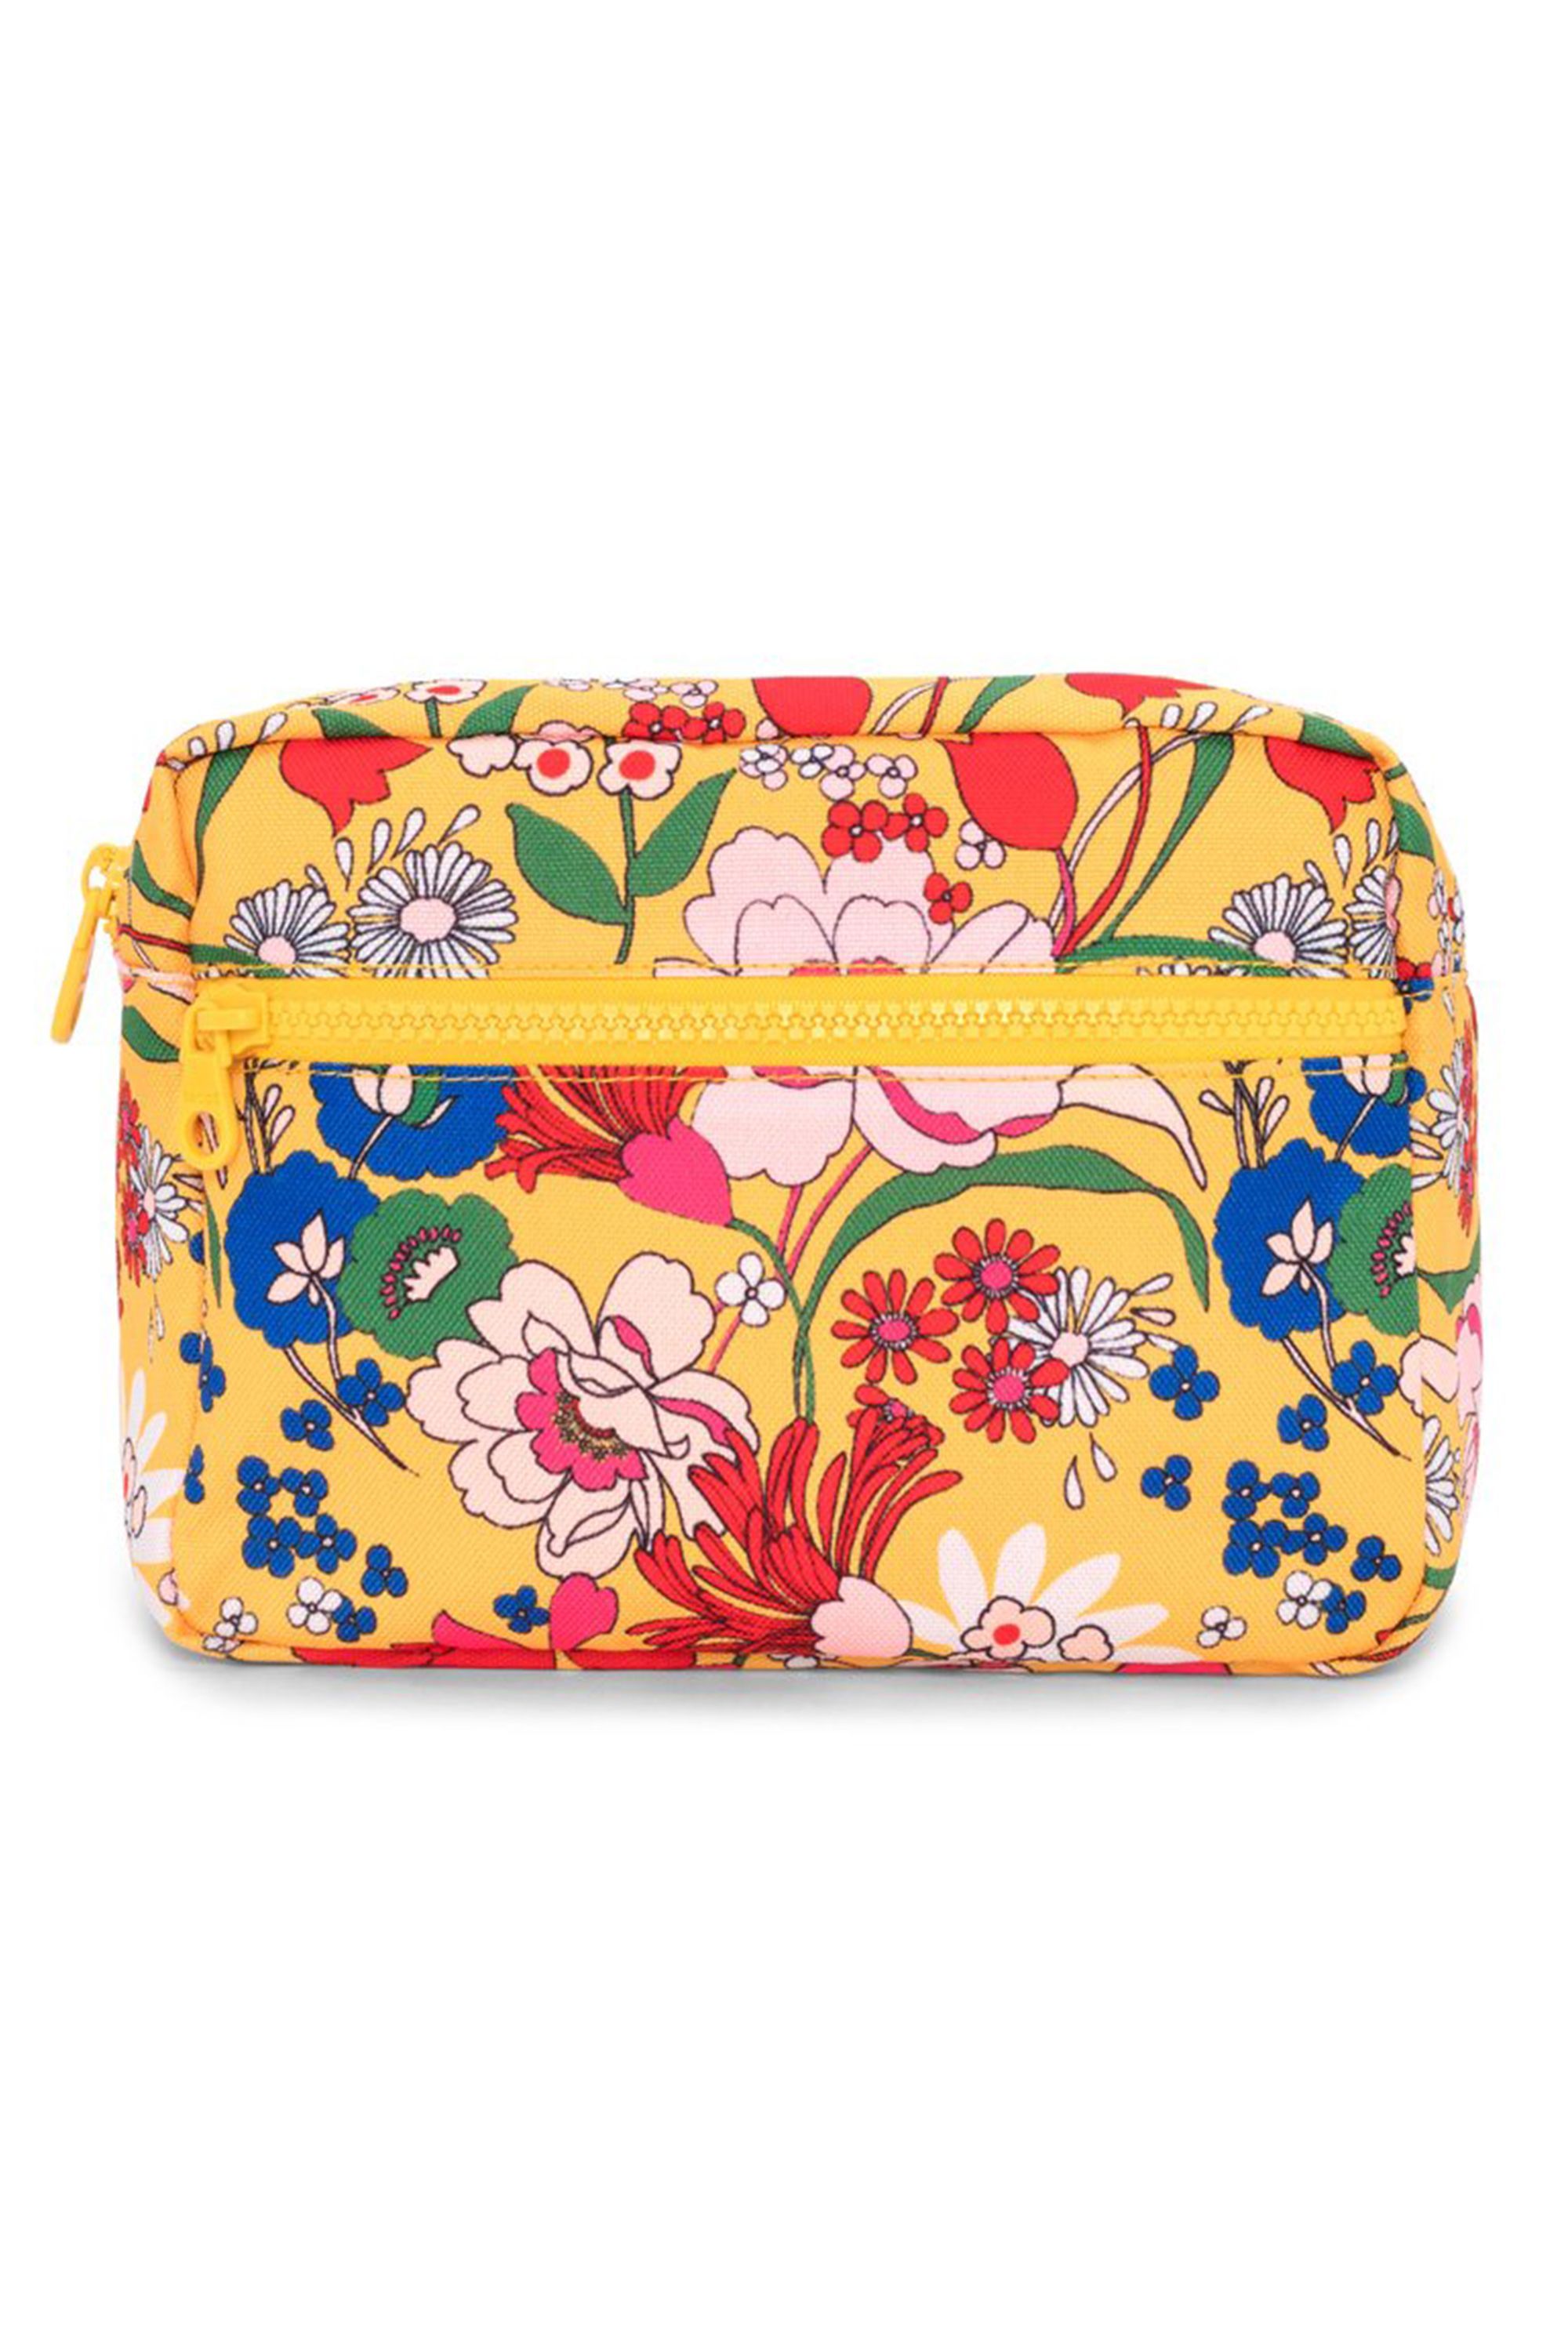 17 Best Travel Toiletry Bags 2022 - Top Travel Cosmetic Bags